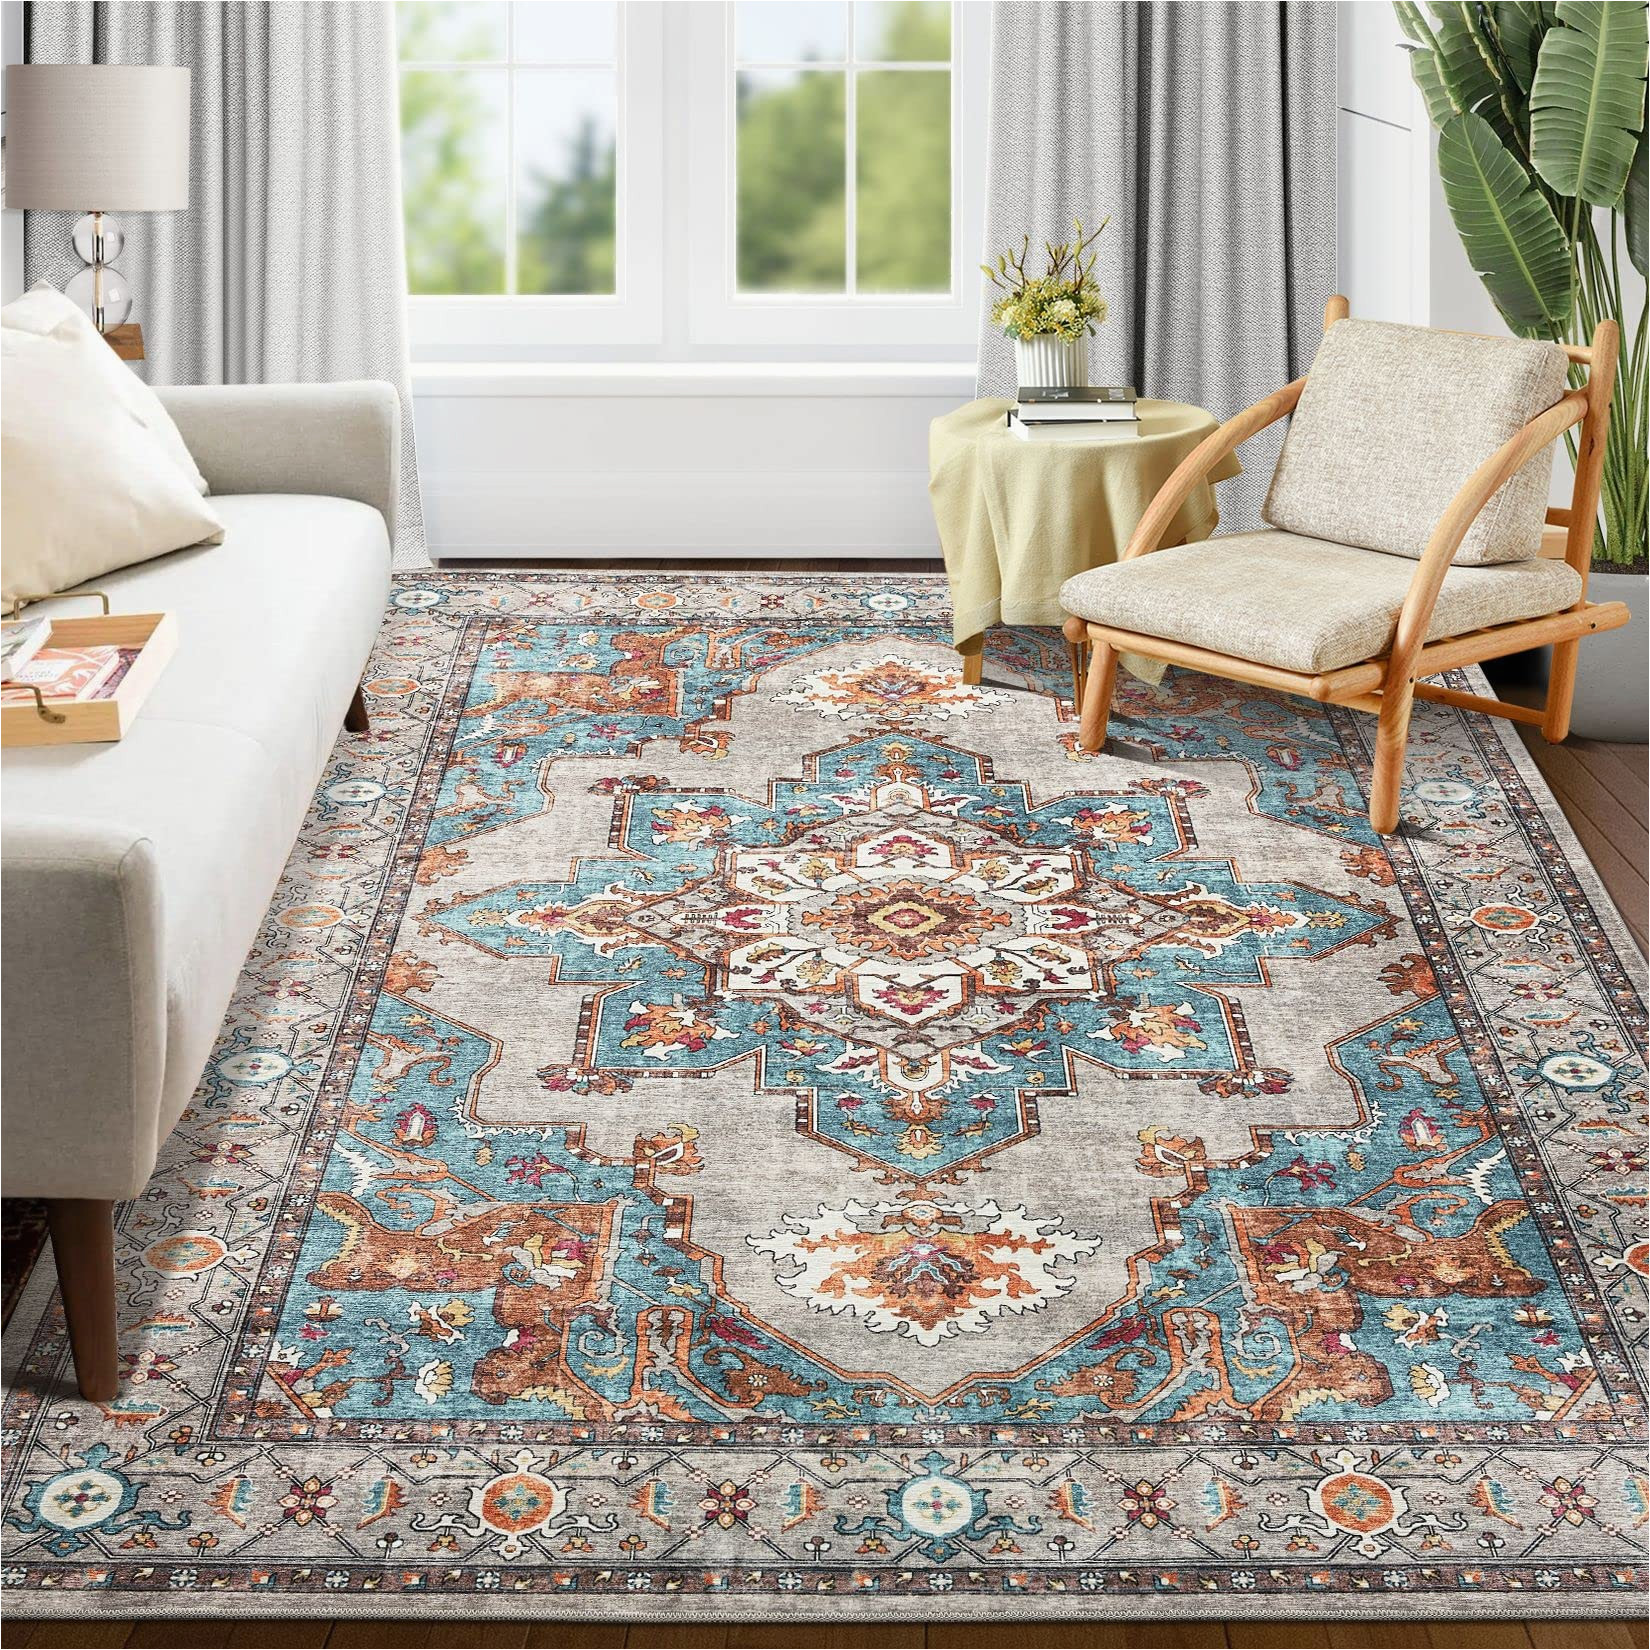 Home Goods area Rugs 8 X 10 area Rug Living Room Rugs: 8×10 Washable Large Carpet Boho oriental Persian Distressed Bohemian Non-slip area Rugs for Dining Room Farmhouse Bedroom …